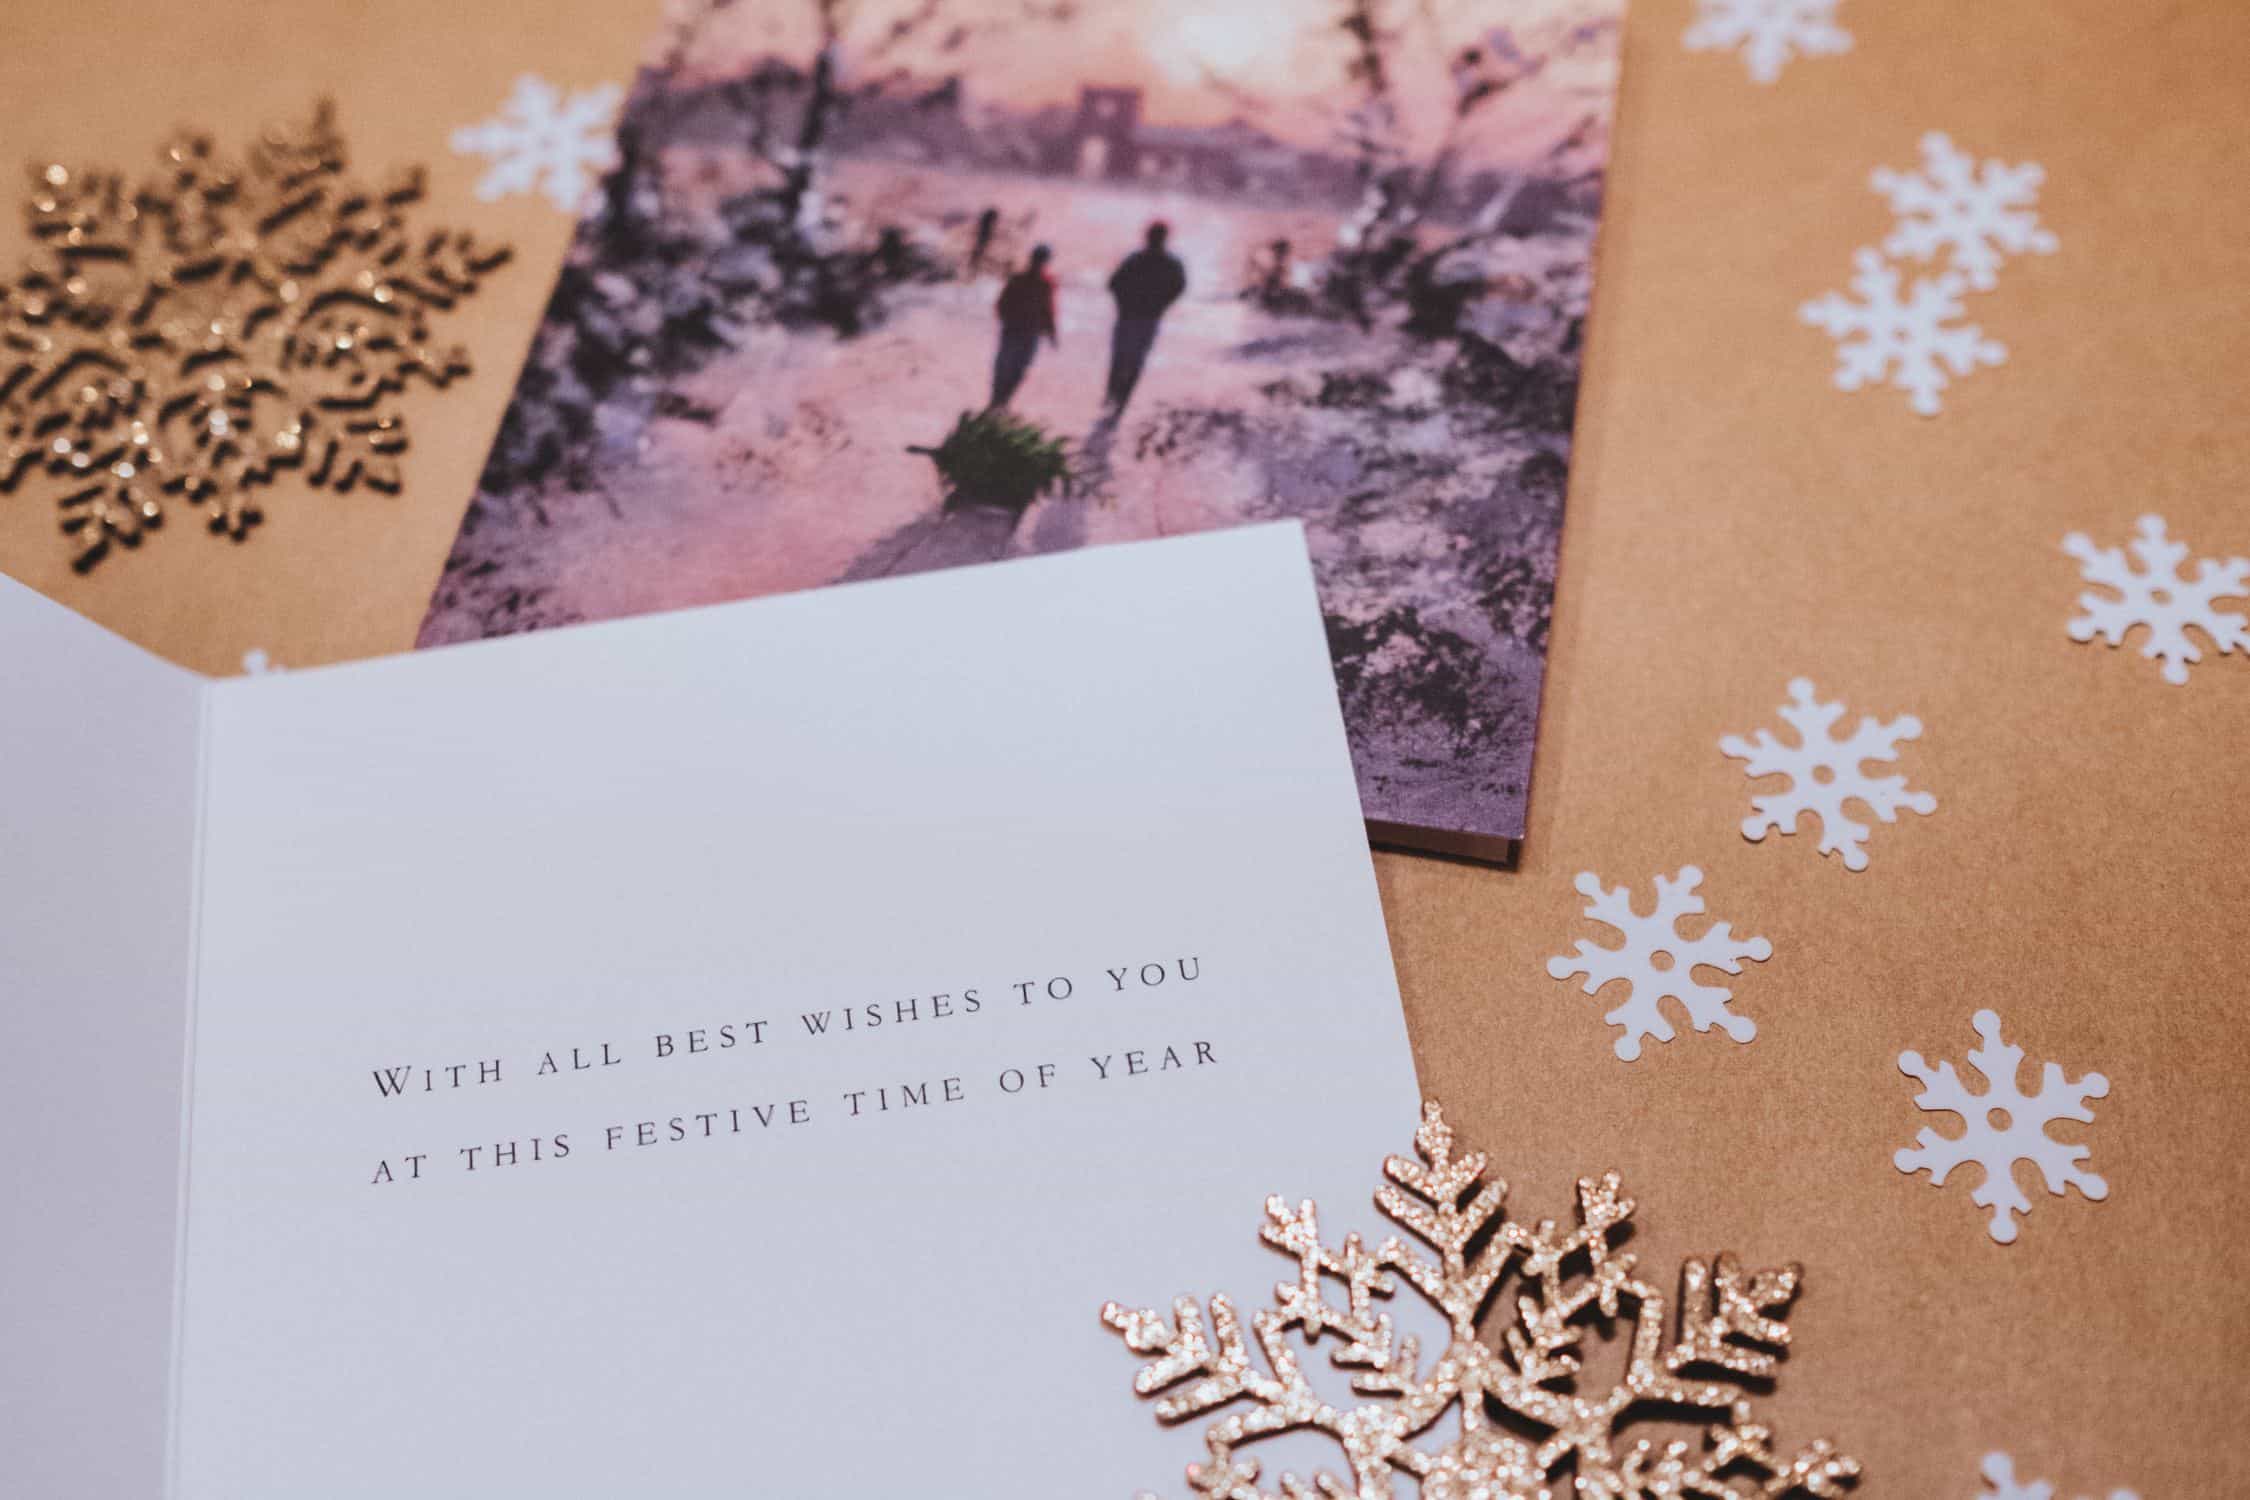 on a golden-brown background, with stylized snowflakes, two large holiday cards are layed out, as well as two golden snowflake decorations. One card is closed and picutes two people walking side by side in a winter wonderland. the card in front of it is open and shows two lines of text, though the words aren't quite readable